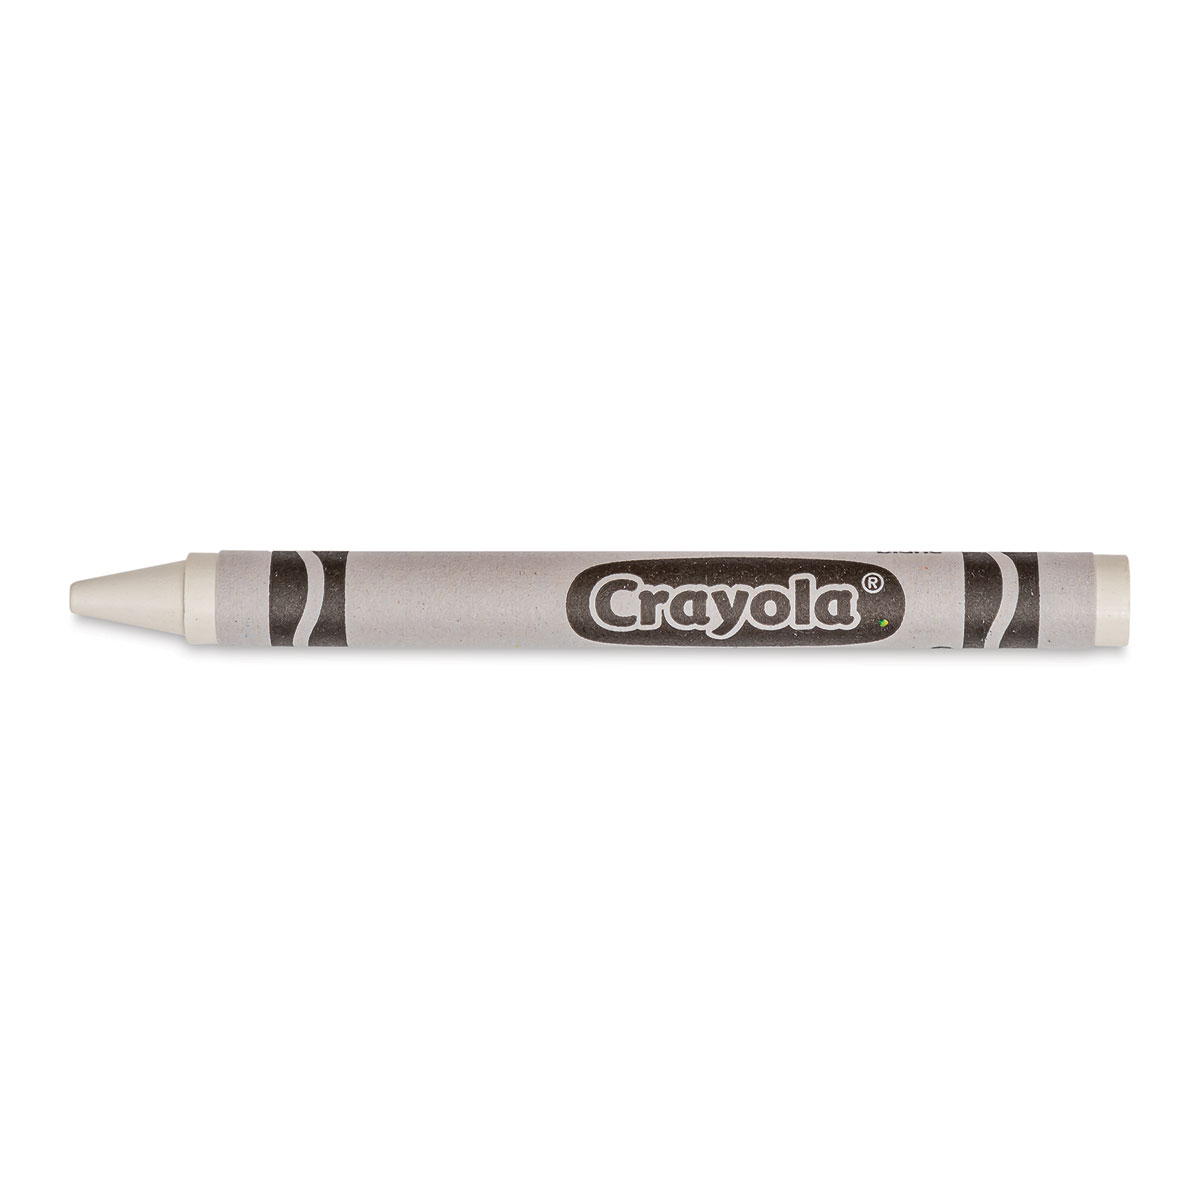 12 Large White Crayons by Crayola 52-0033053 